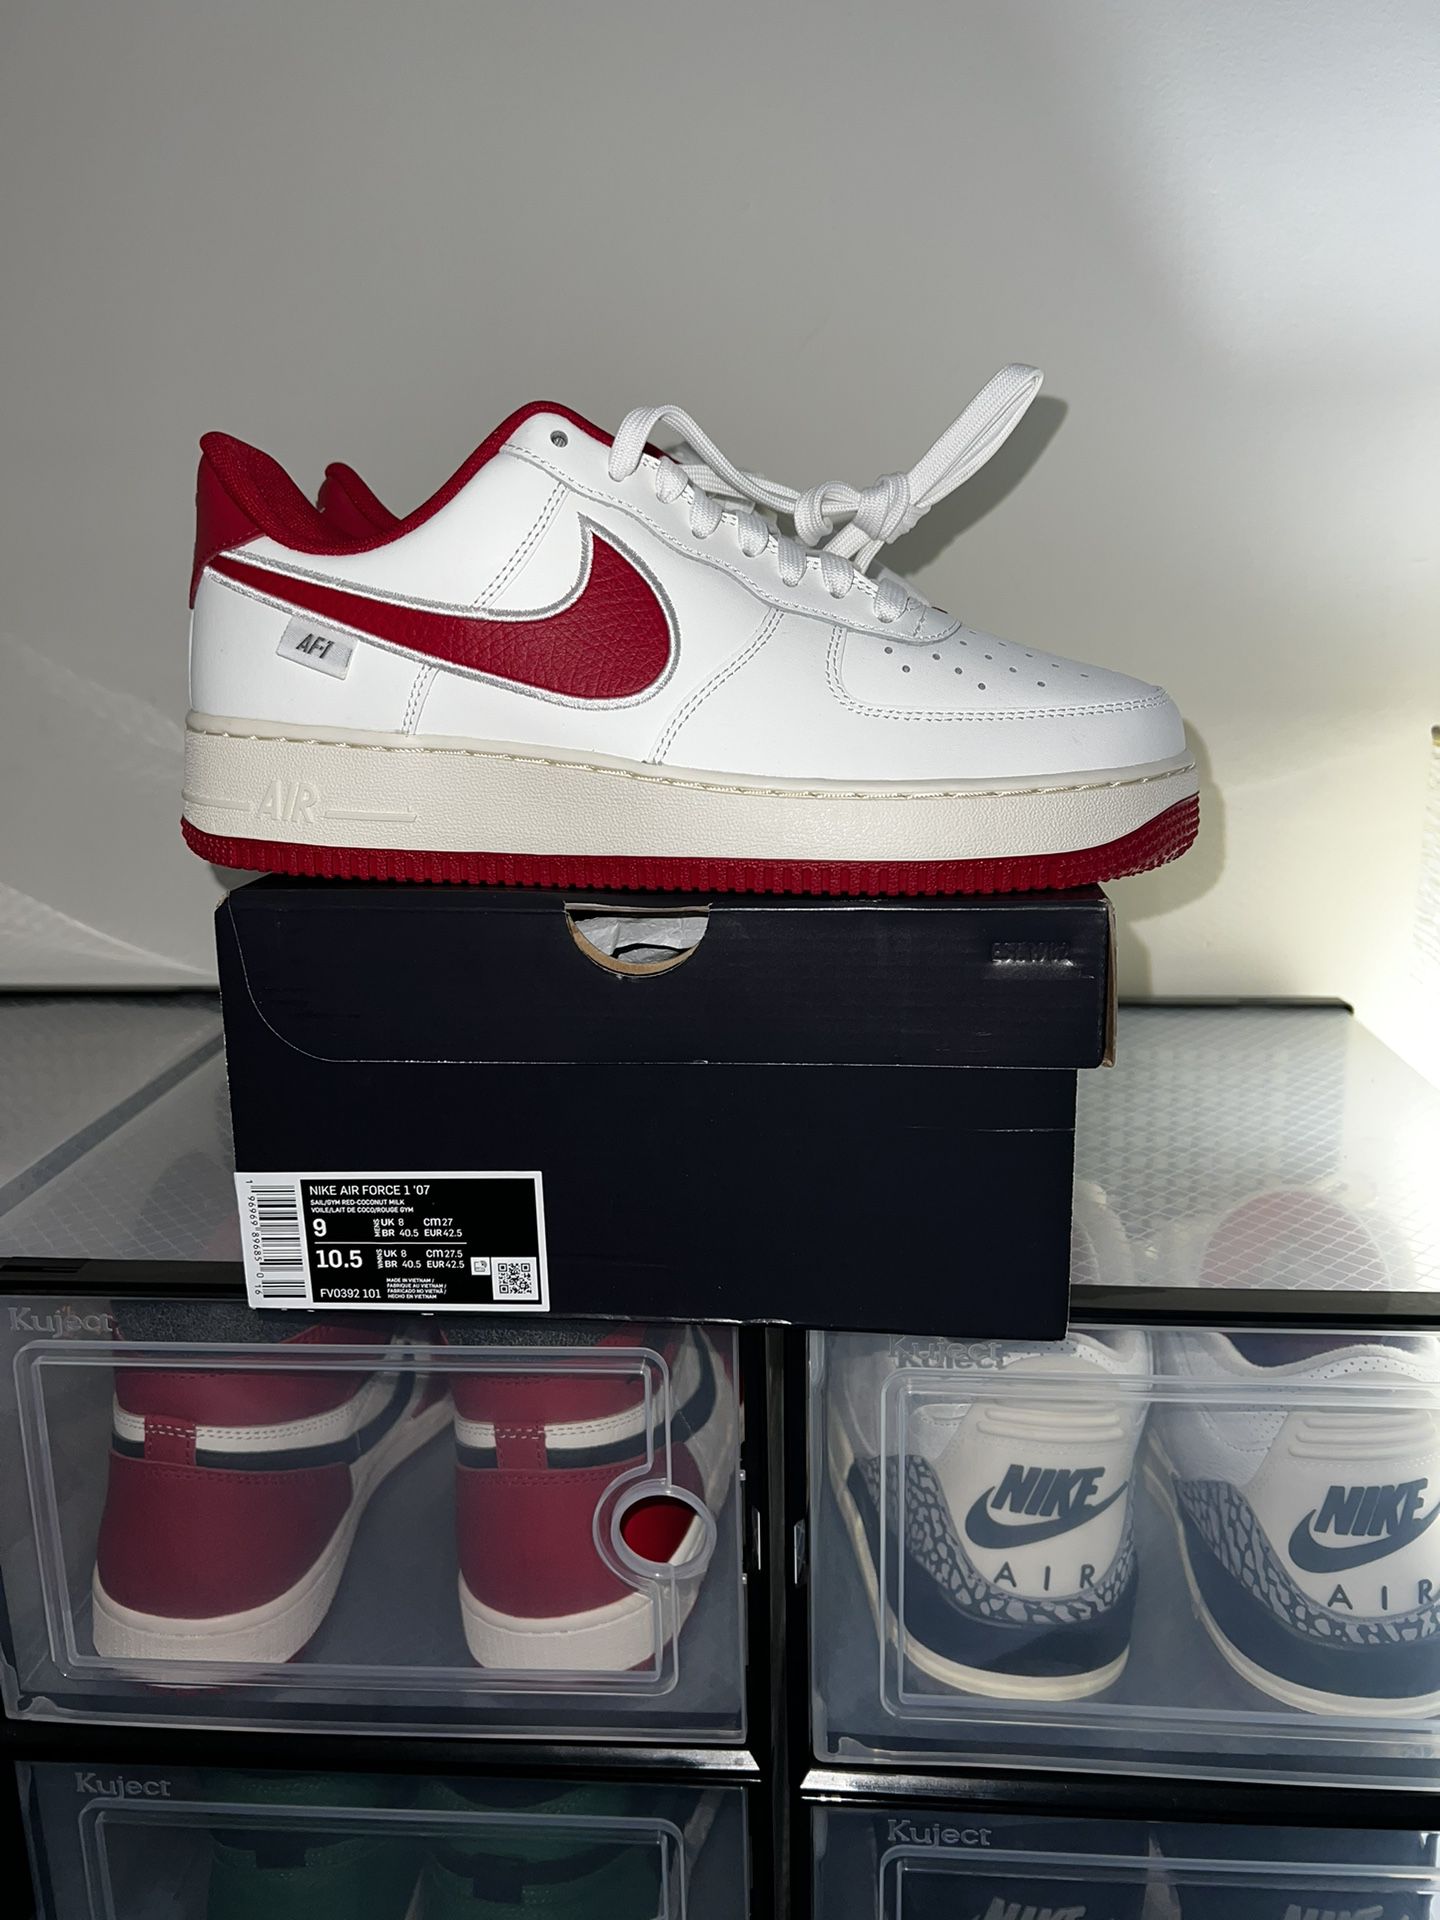 NIKE AIR FORCE 1 Men’s Size 9 New !!